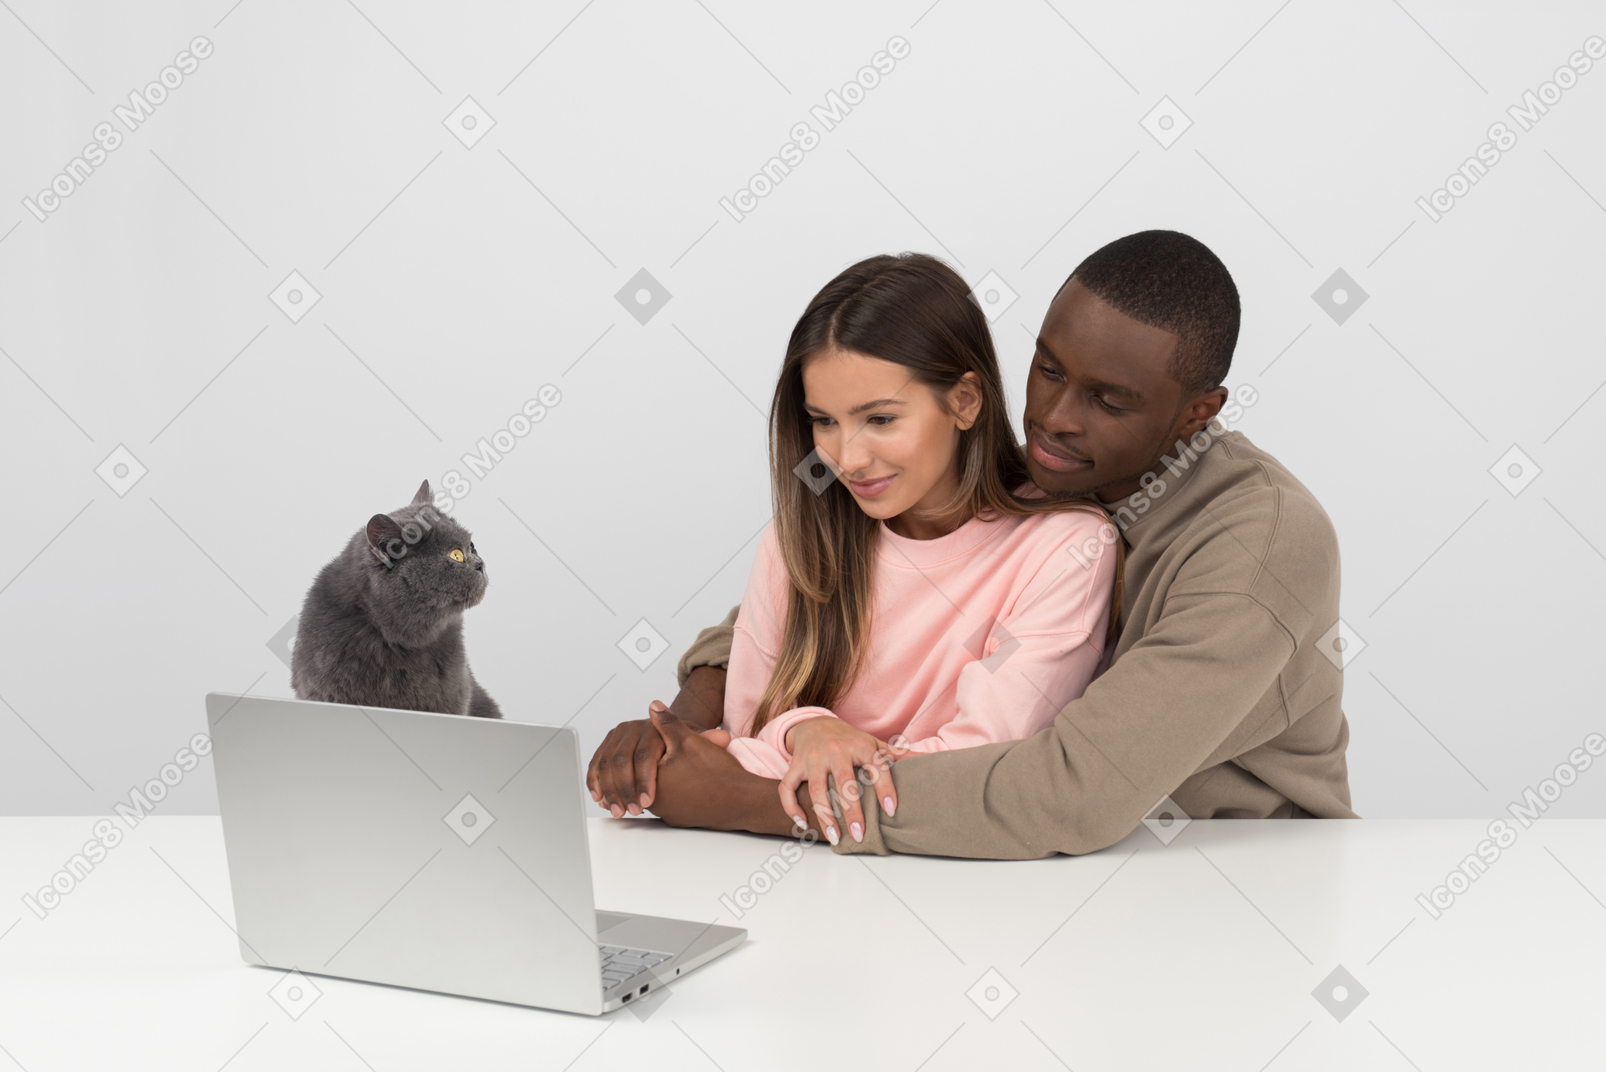 British shorthair cat looking disapprovingly at couple absorbed in watching some show